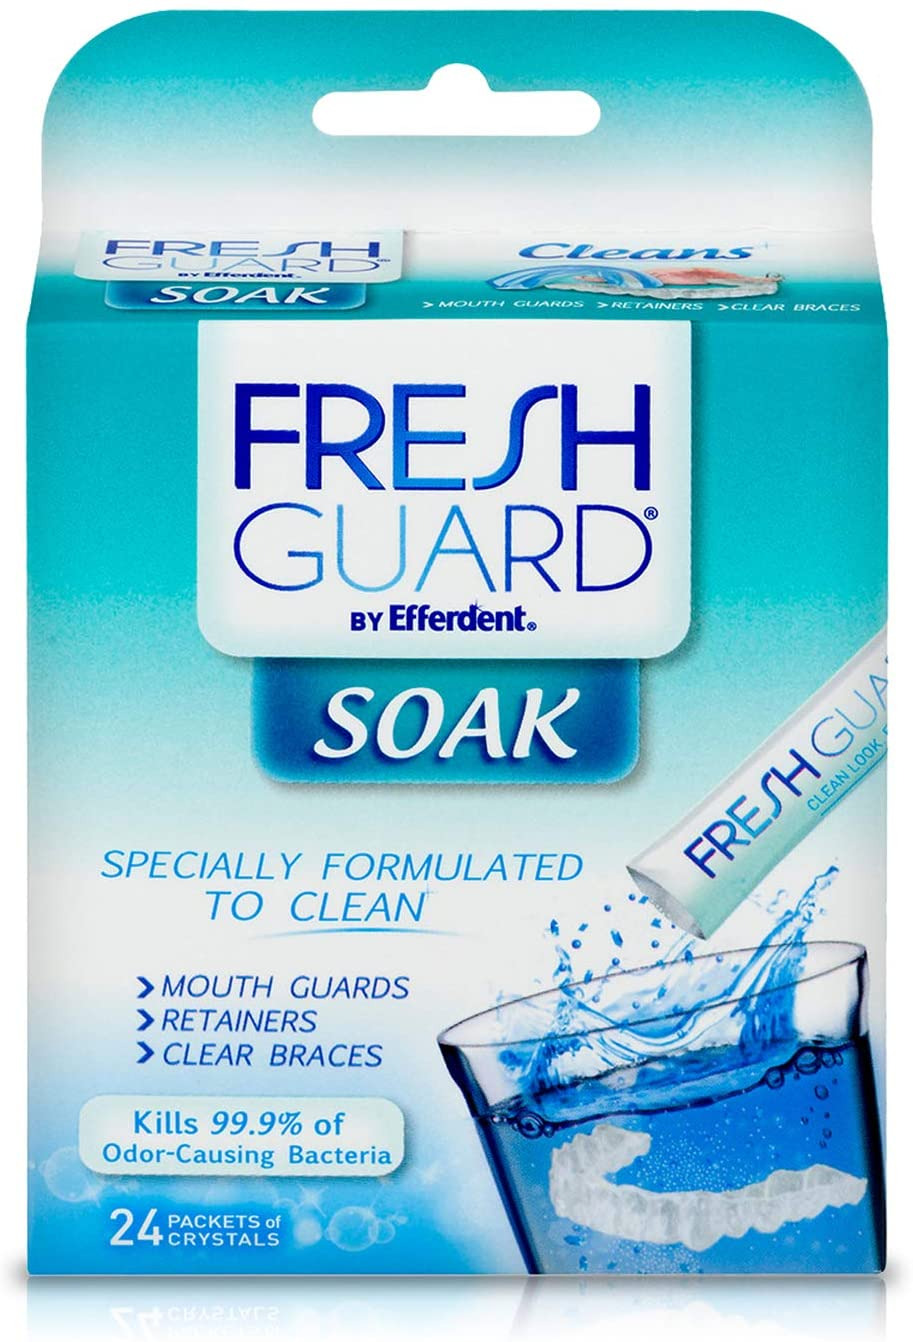 Fresh Guard Soak By Efferdent For Retainers & Clear Braces,24 Count